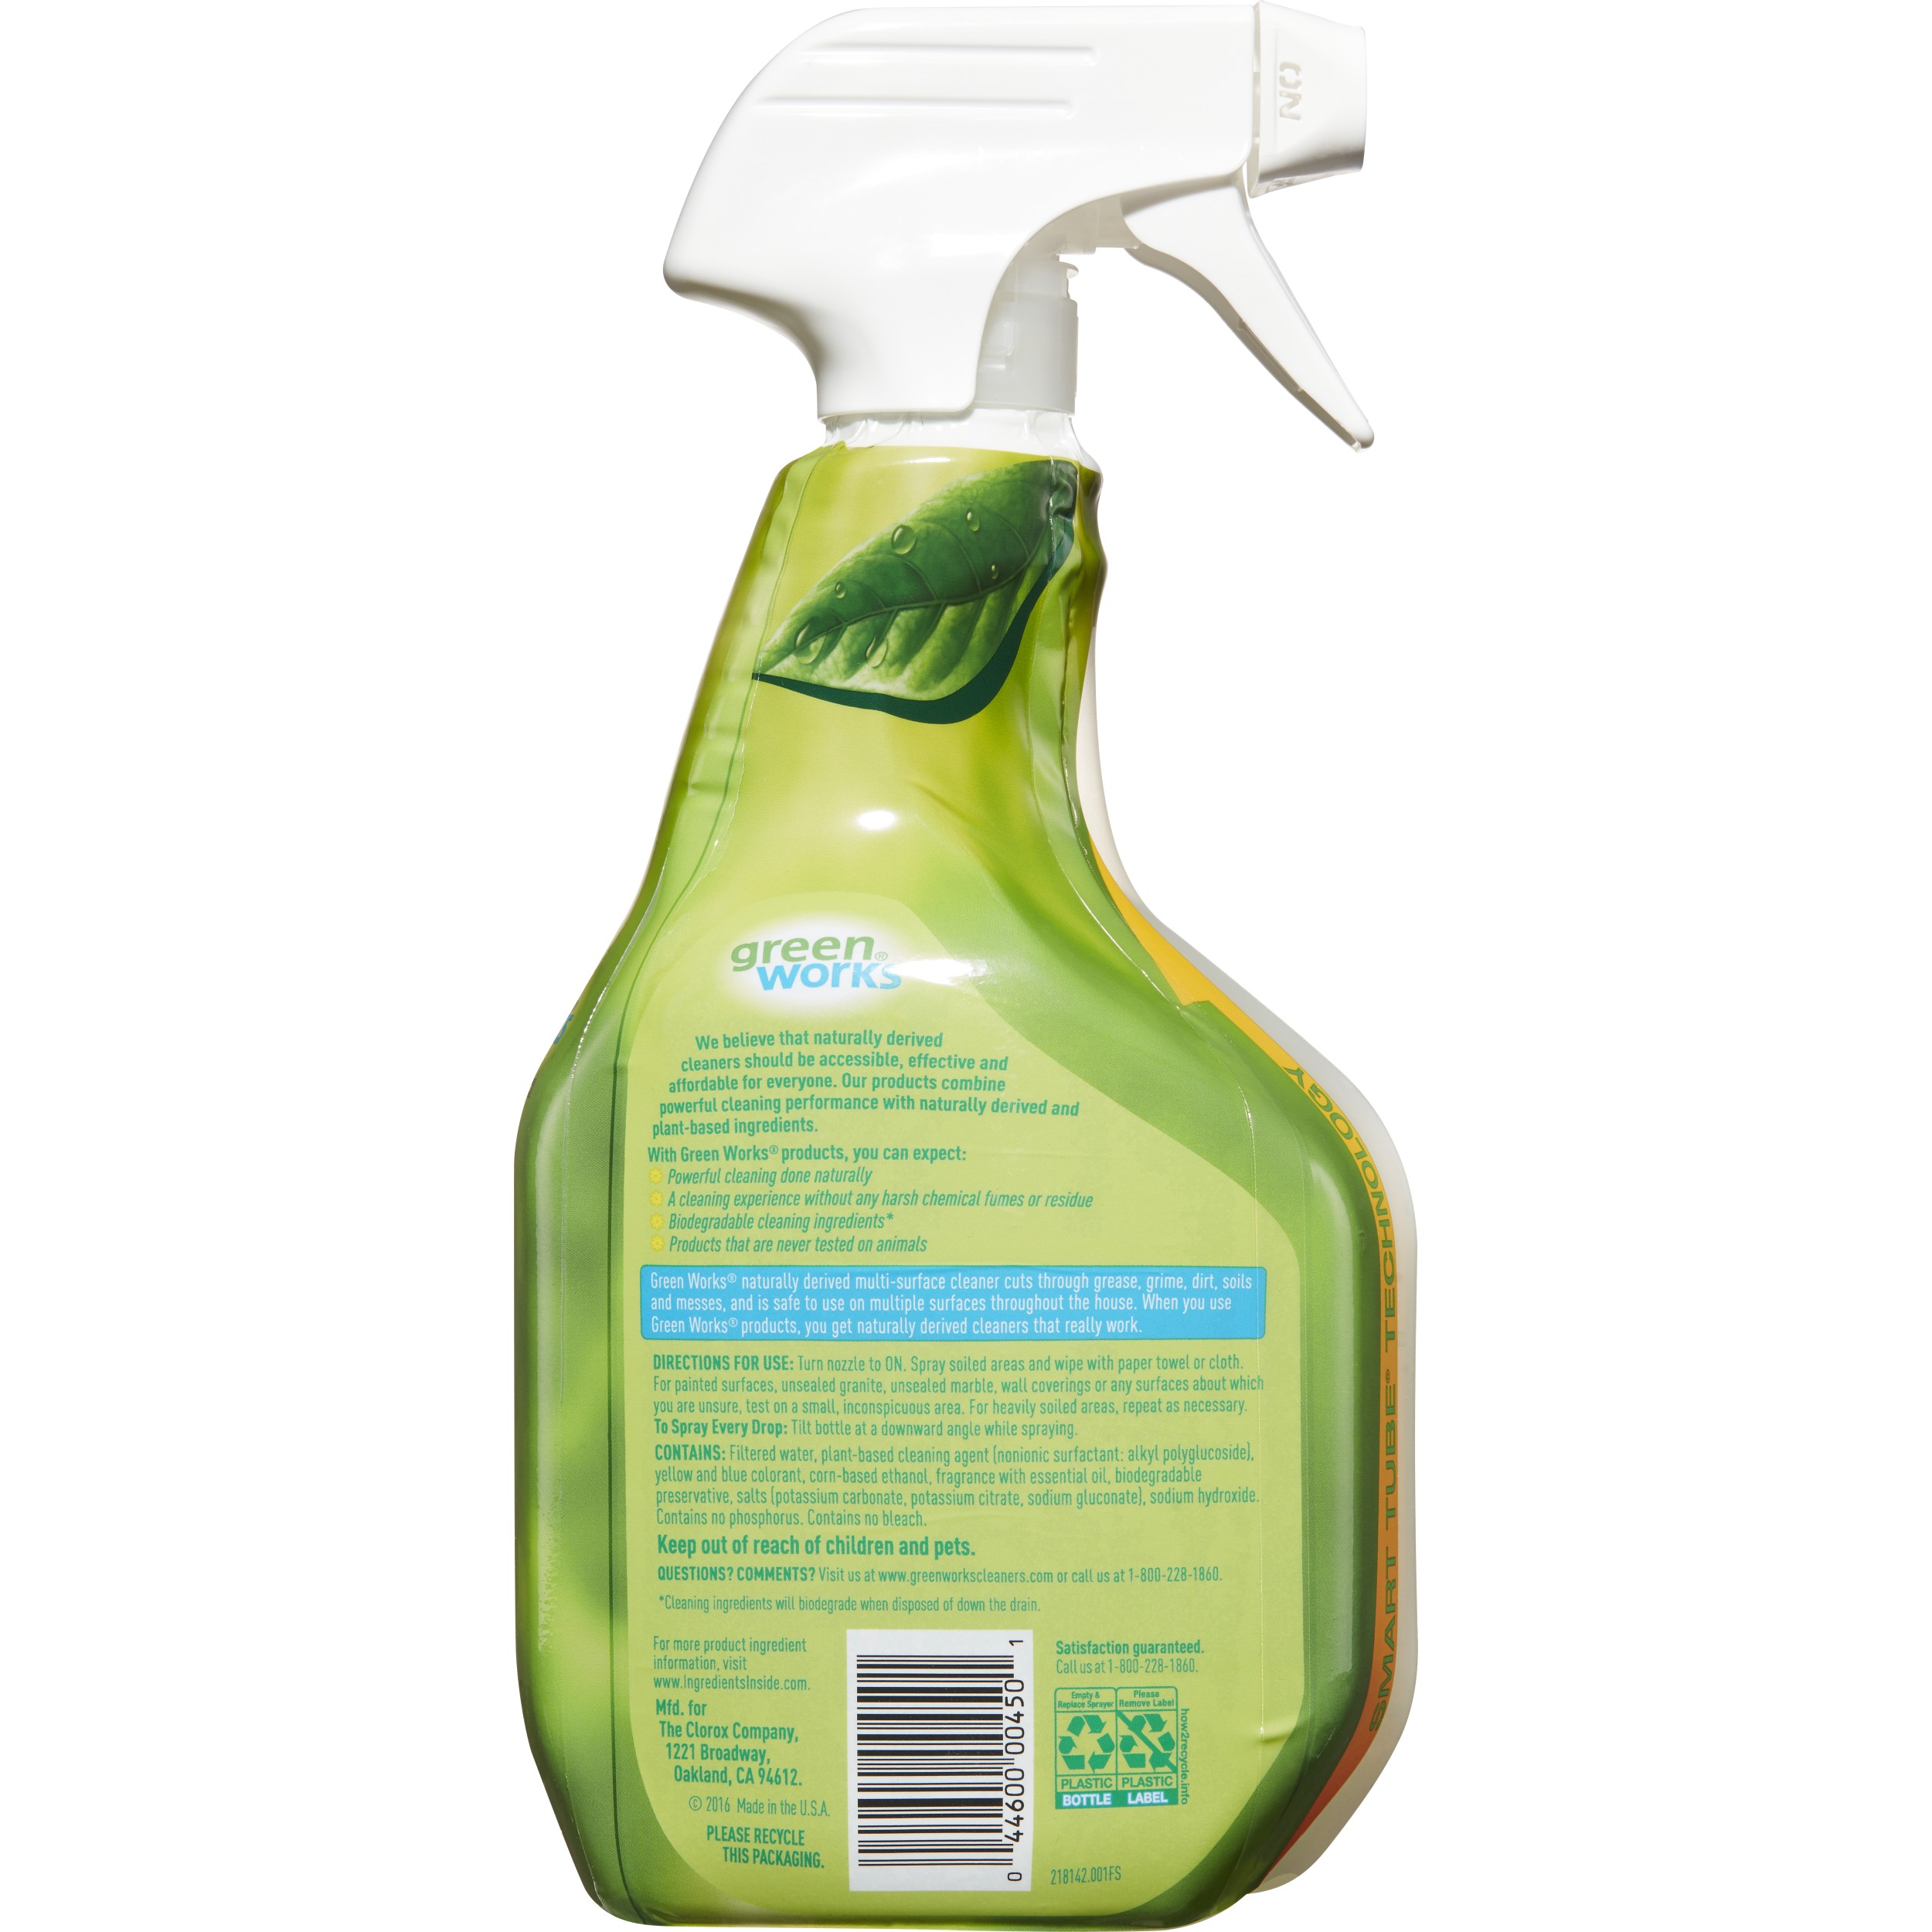 Green Works Multi-Surface Cleaner, Cleaning Spray - Original Fresh, 32 oz - image 2 of 4